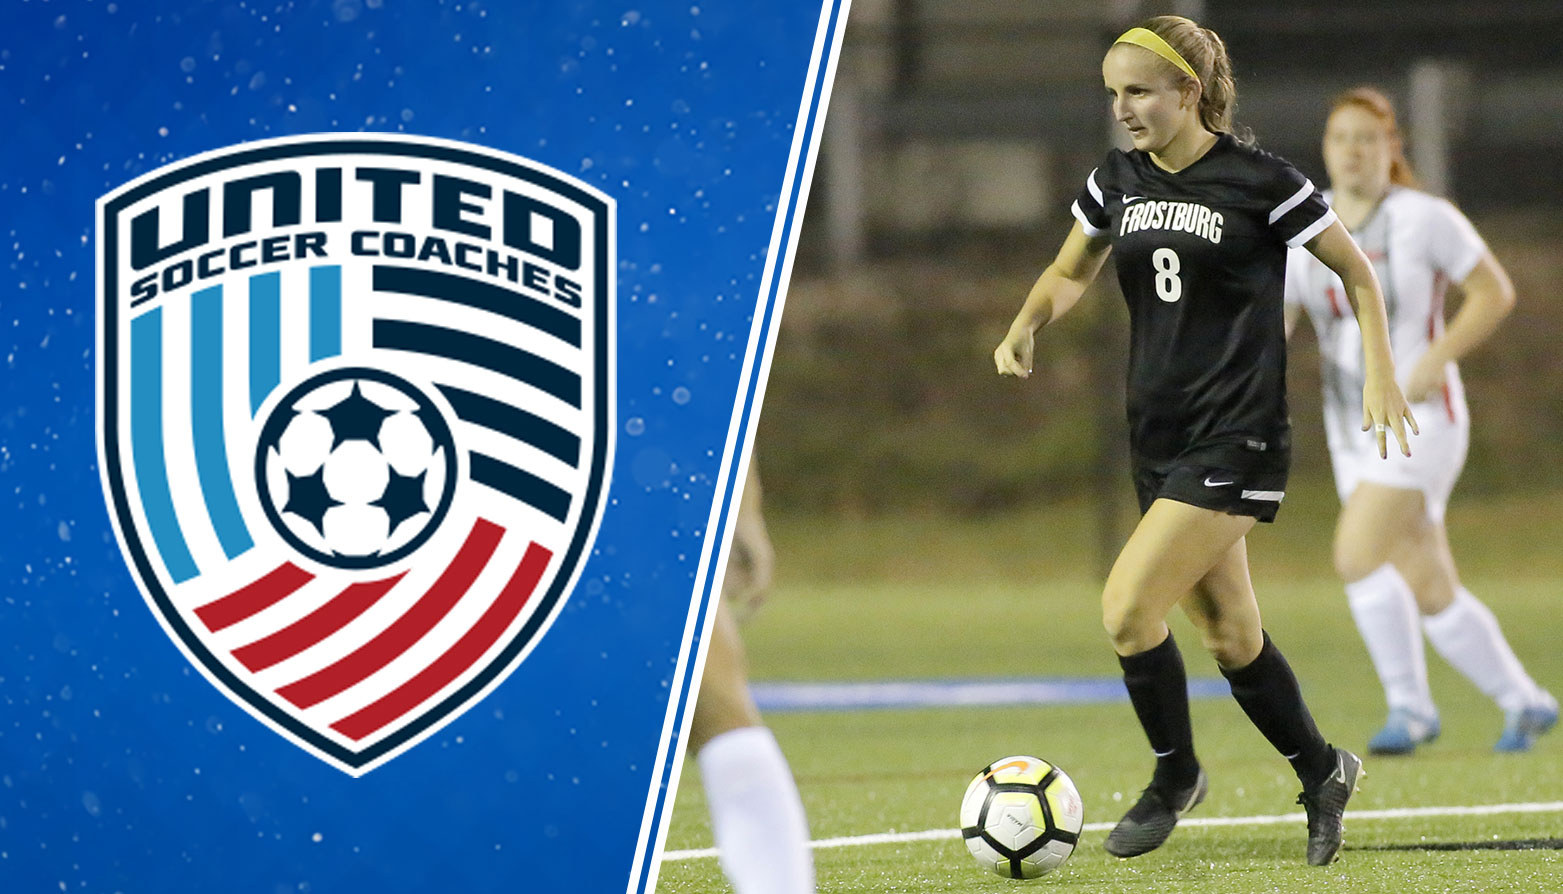 Frostburg State Women Earns United Soccer Coaches Team Ethics and Sportsmanship Honors